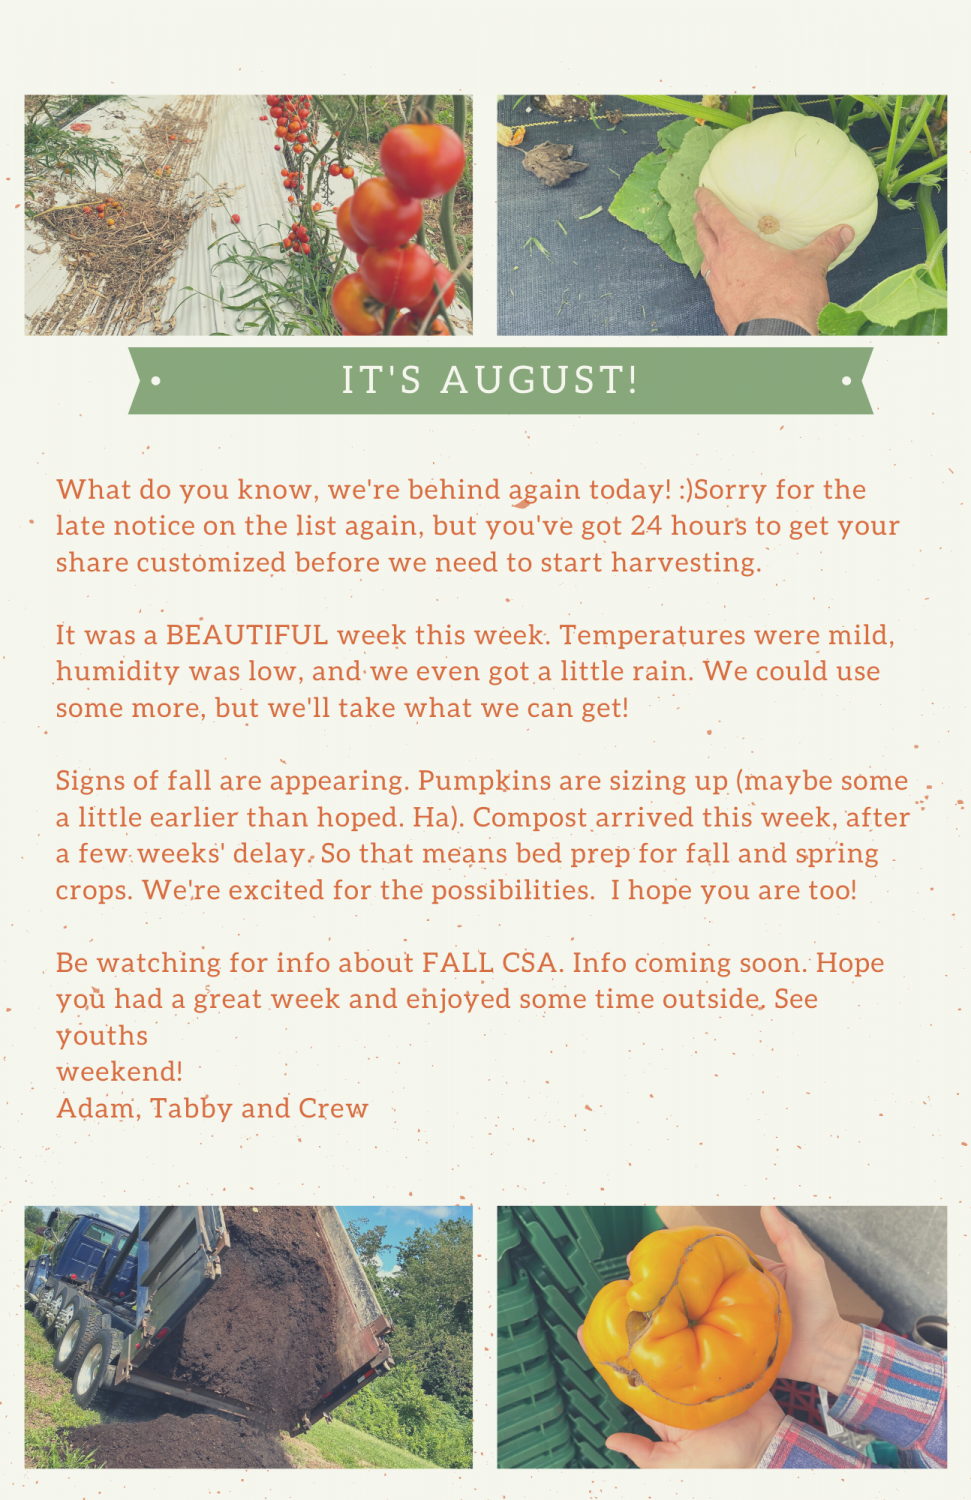 Previous Happening: Farm Happenings for August 6, 2021